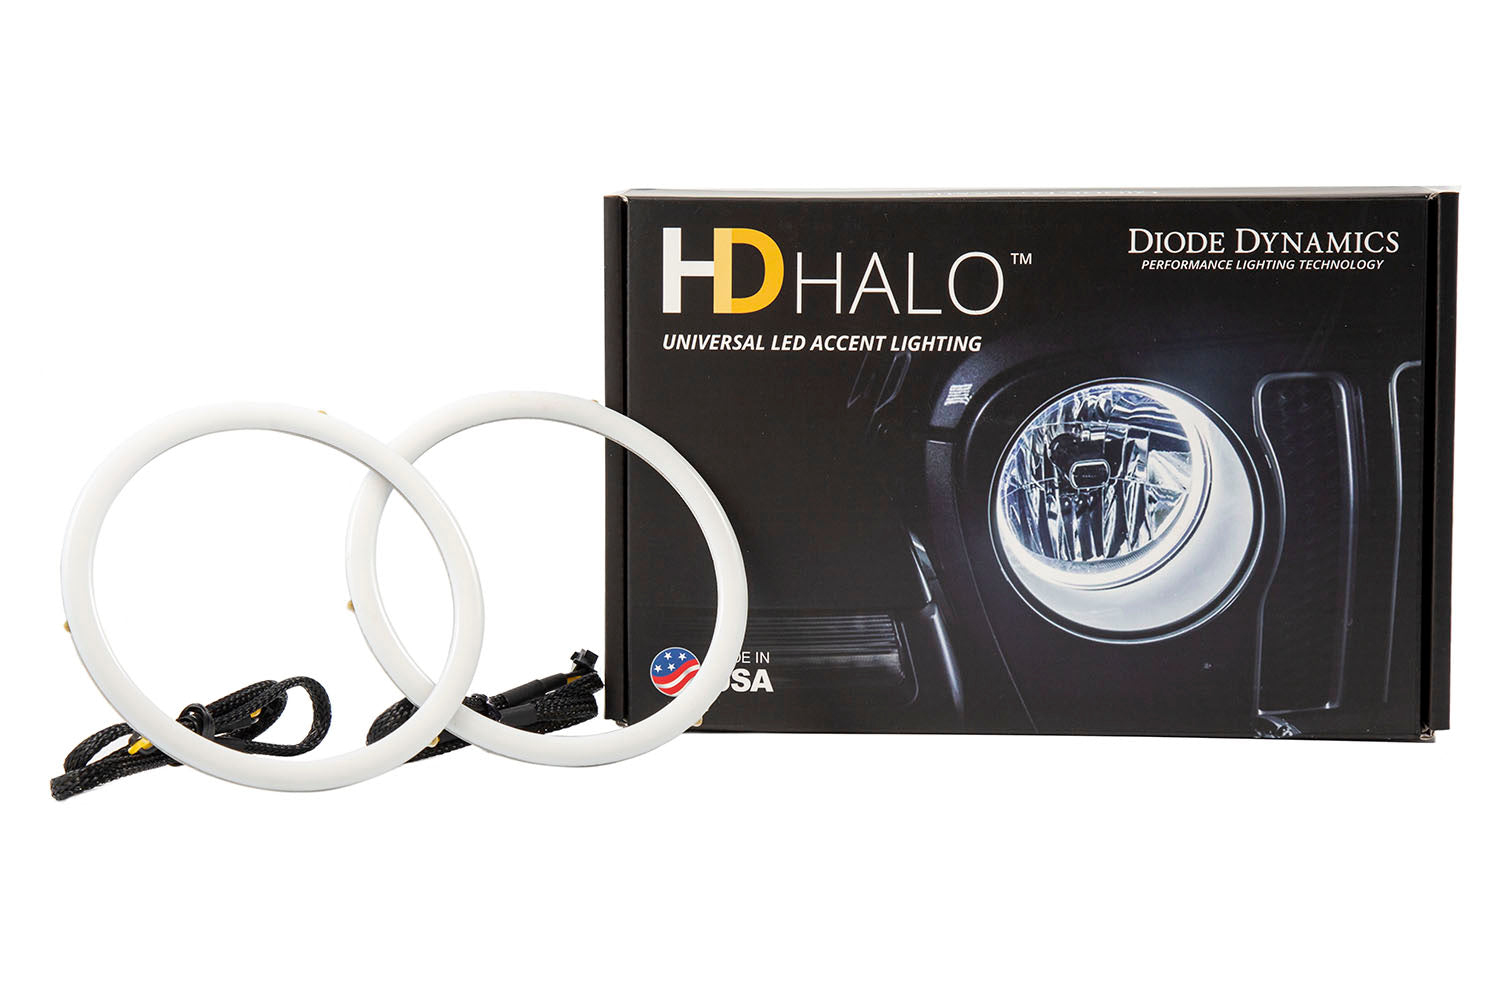 Halo Lights LED 120mm White Pair Diode Dynamics